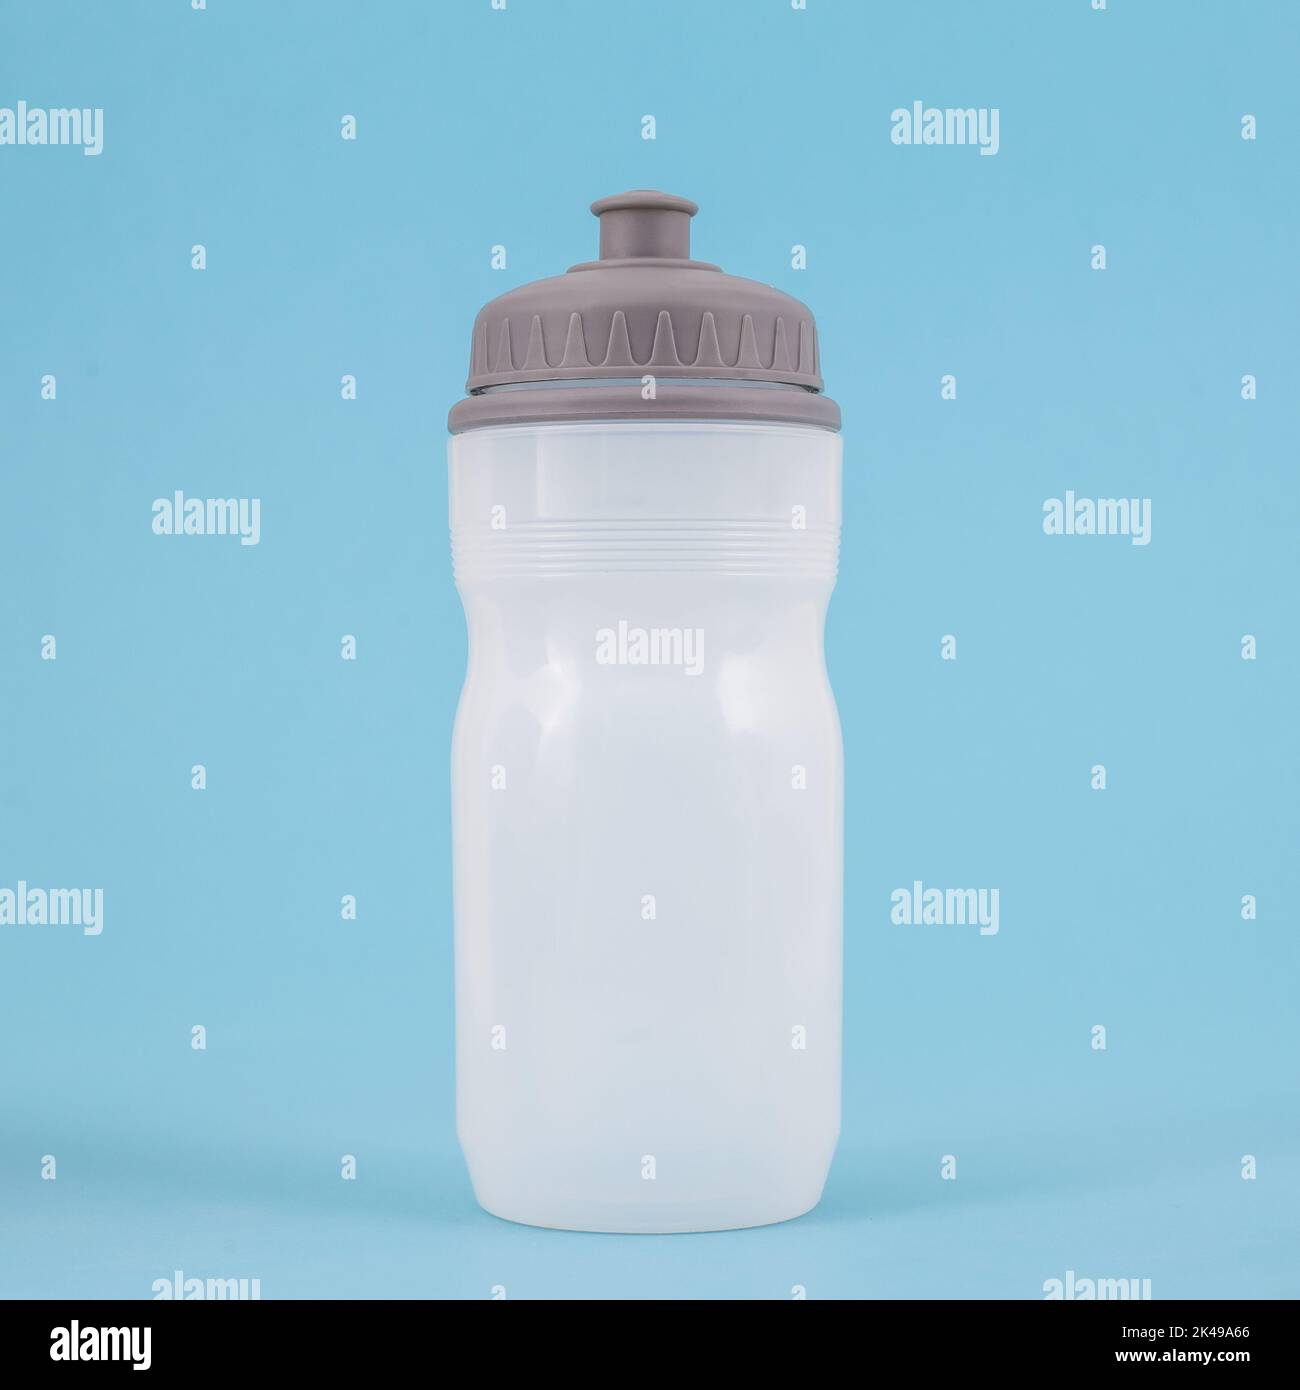 https://c8.alamy.com/comp/2K49A66/plastic-sport-water-bottle-isolated-on-blue-background-for-drinking-2K49A66.jpg